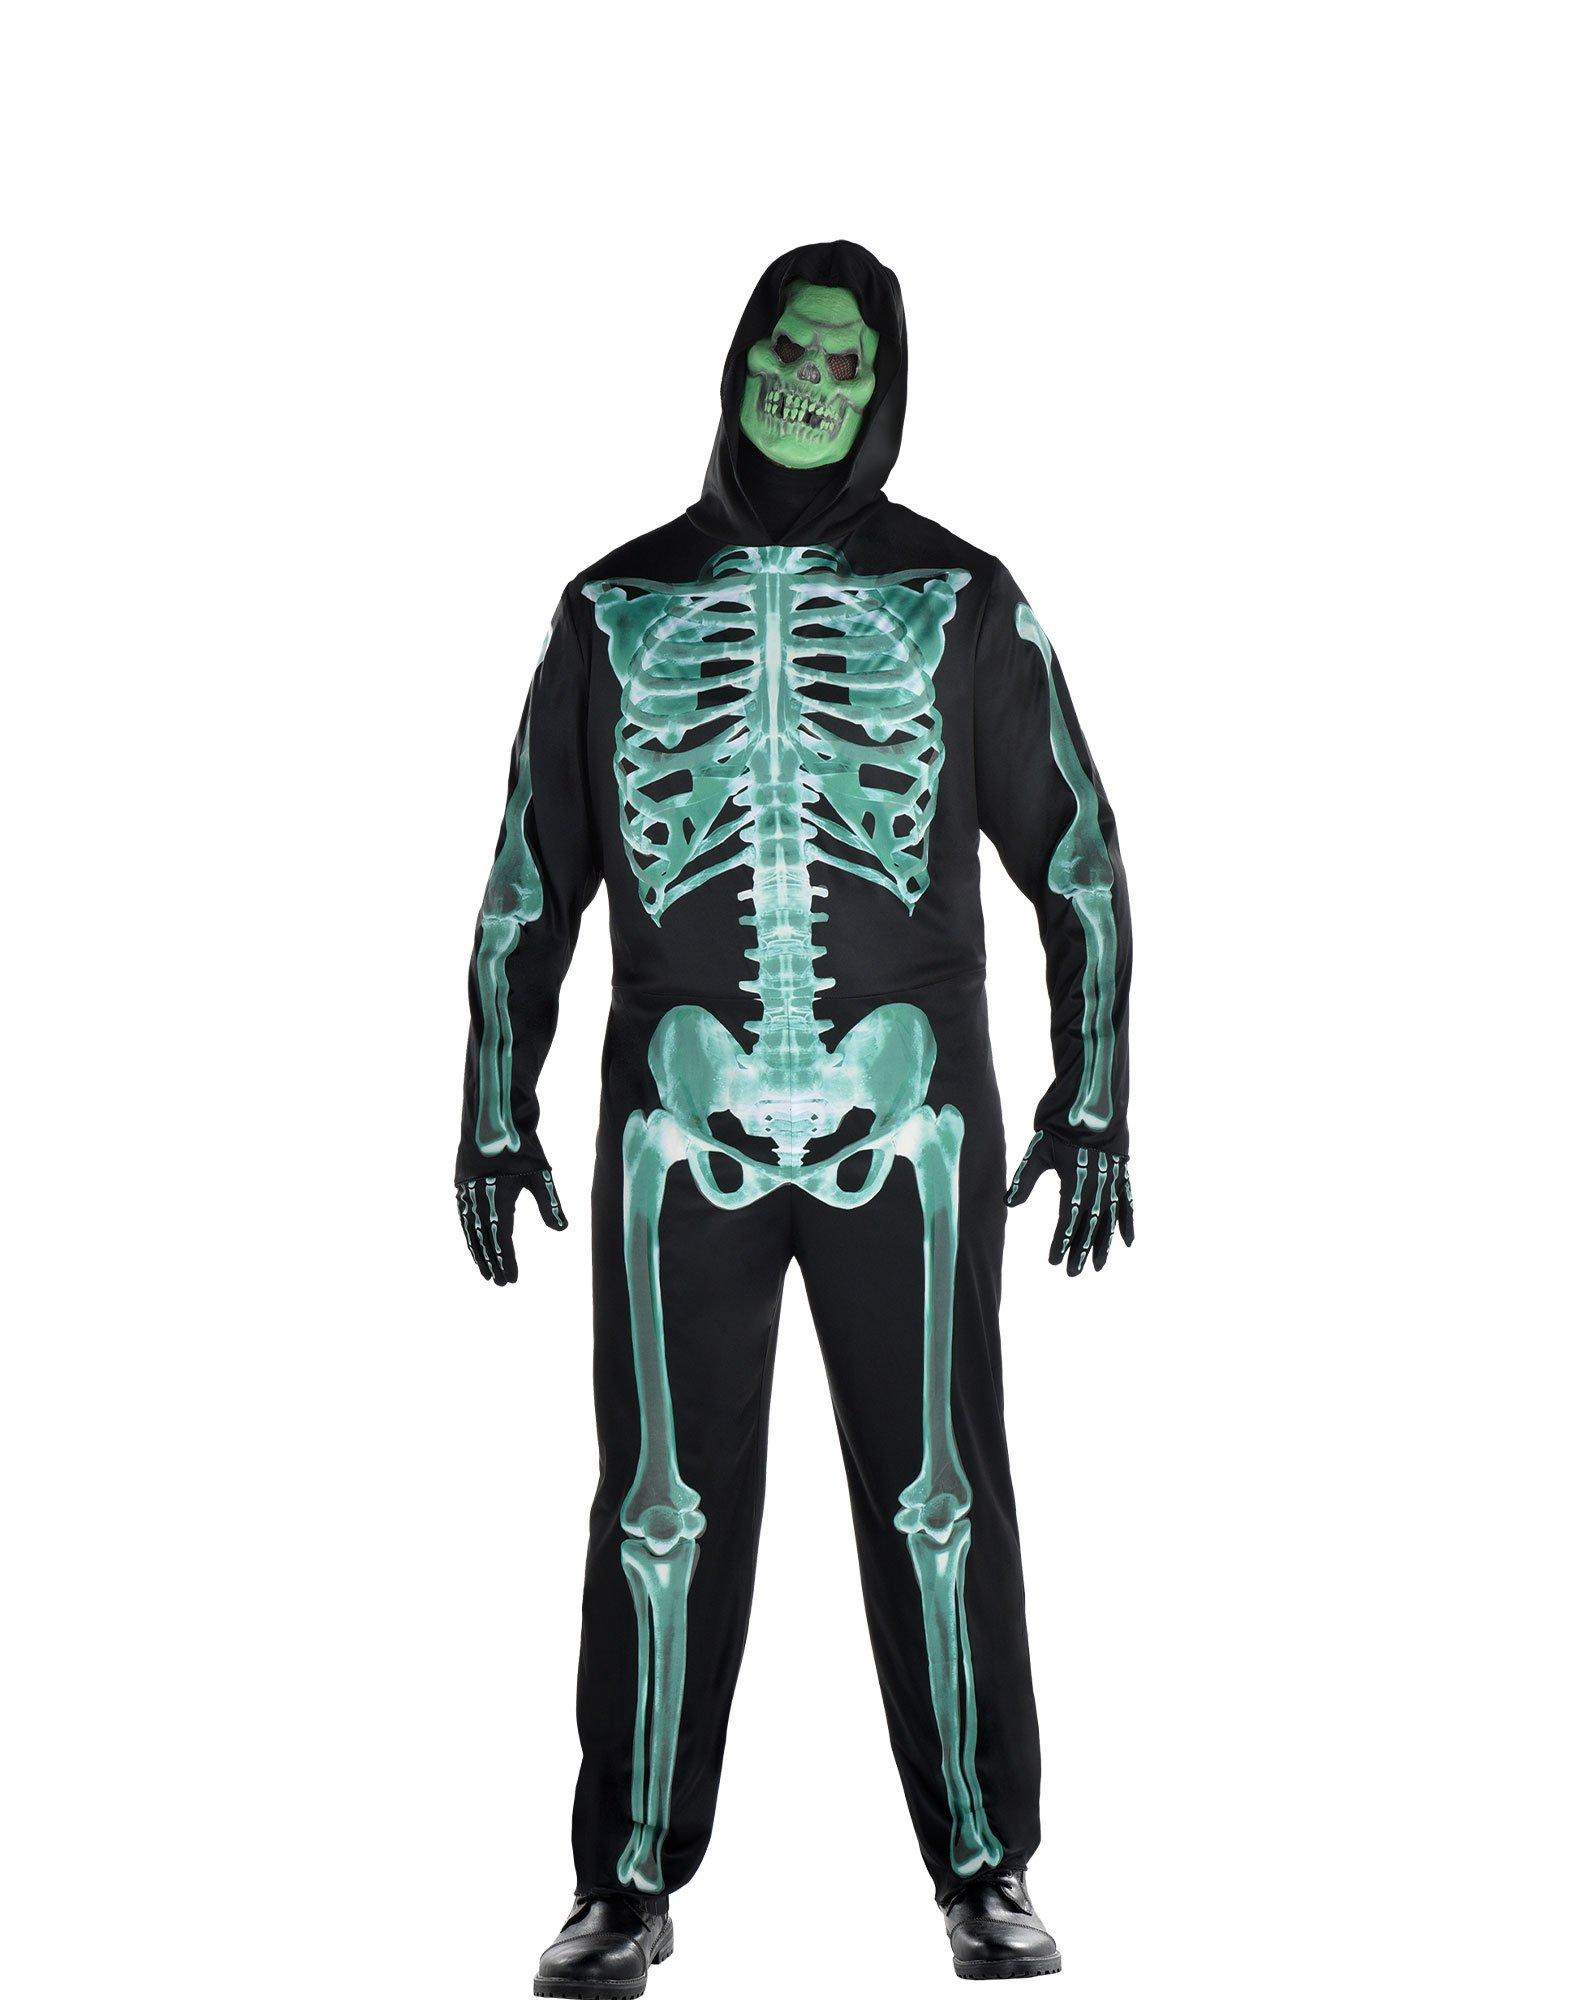 Adult Halloween Costumes & Adult Costume Ideas 2022 | Party City ...